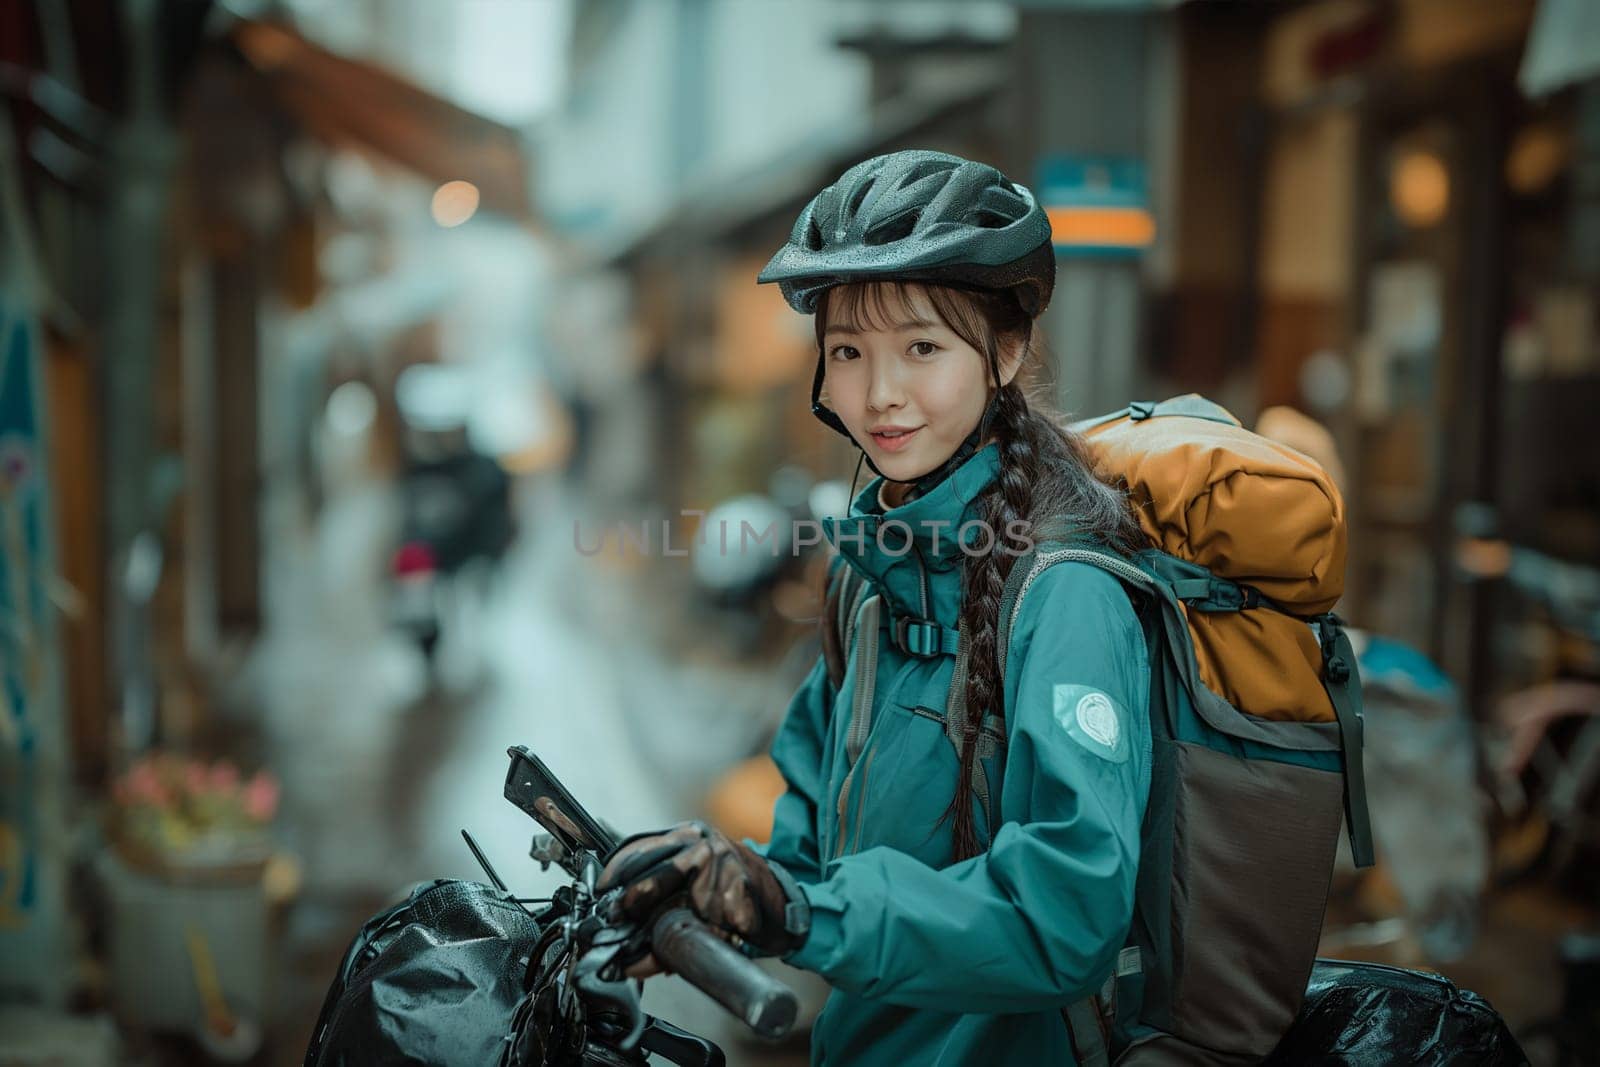 Female delivery person with bicycle using mobile. Food delivery.